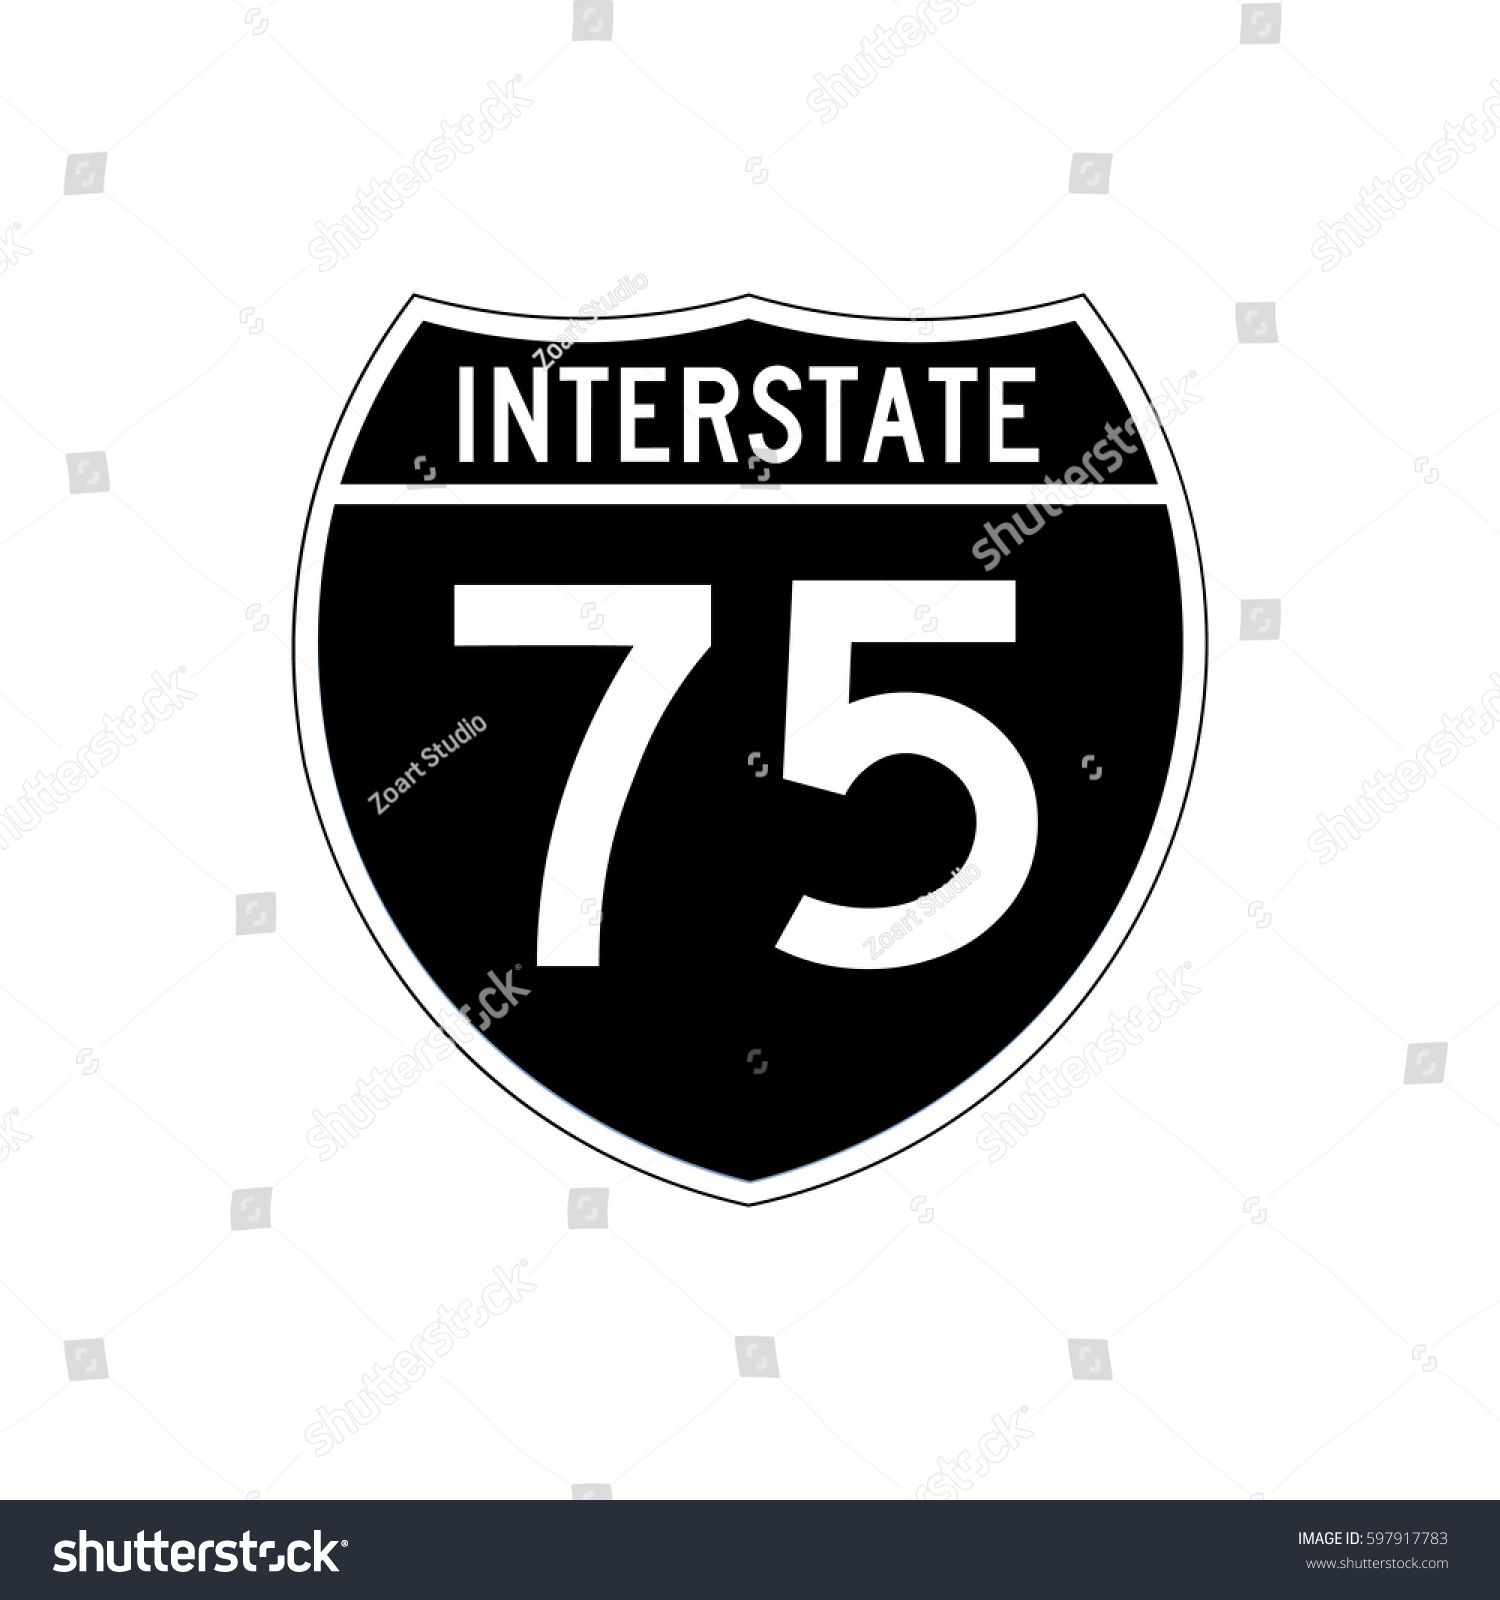 Interstate highway 75 road sign, Black variant - Royalty Free Stock ...